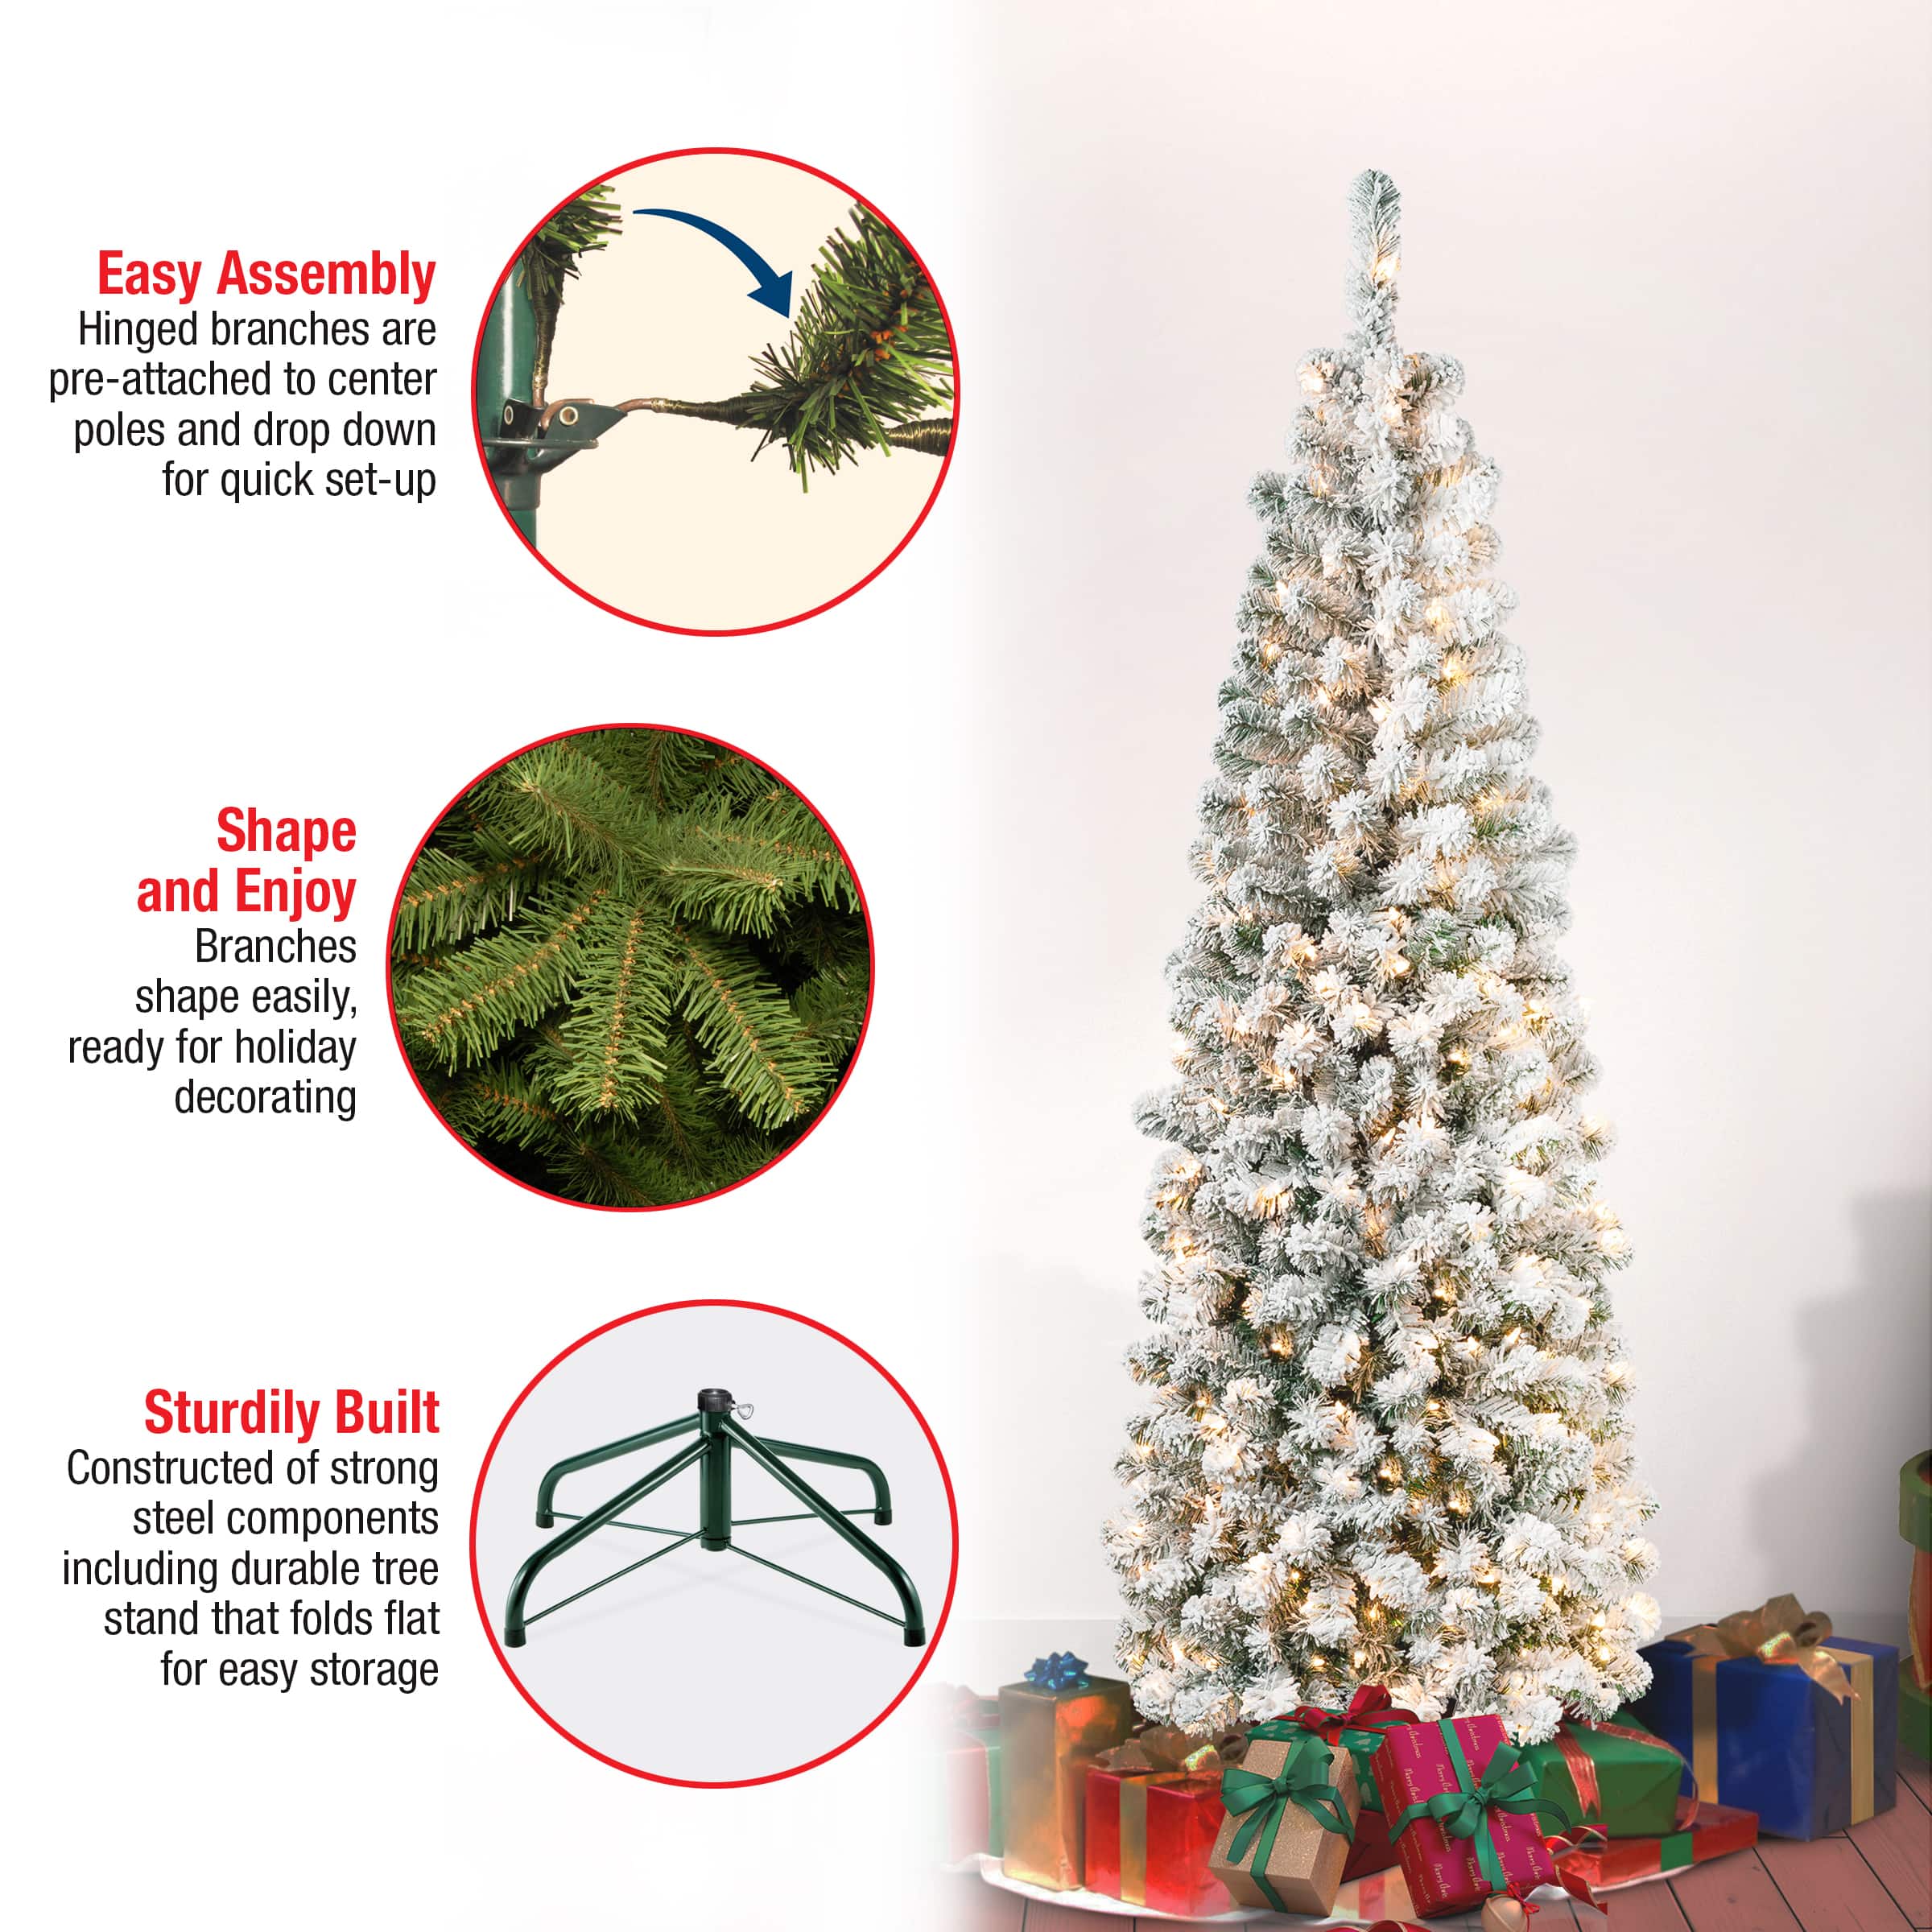 6ft. Acacia Pencil Slim Flocked Artificial Christmas Tree, Clear Lights